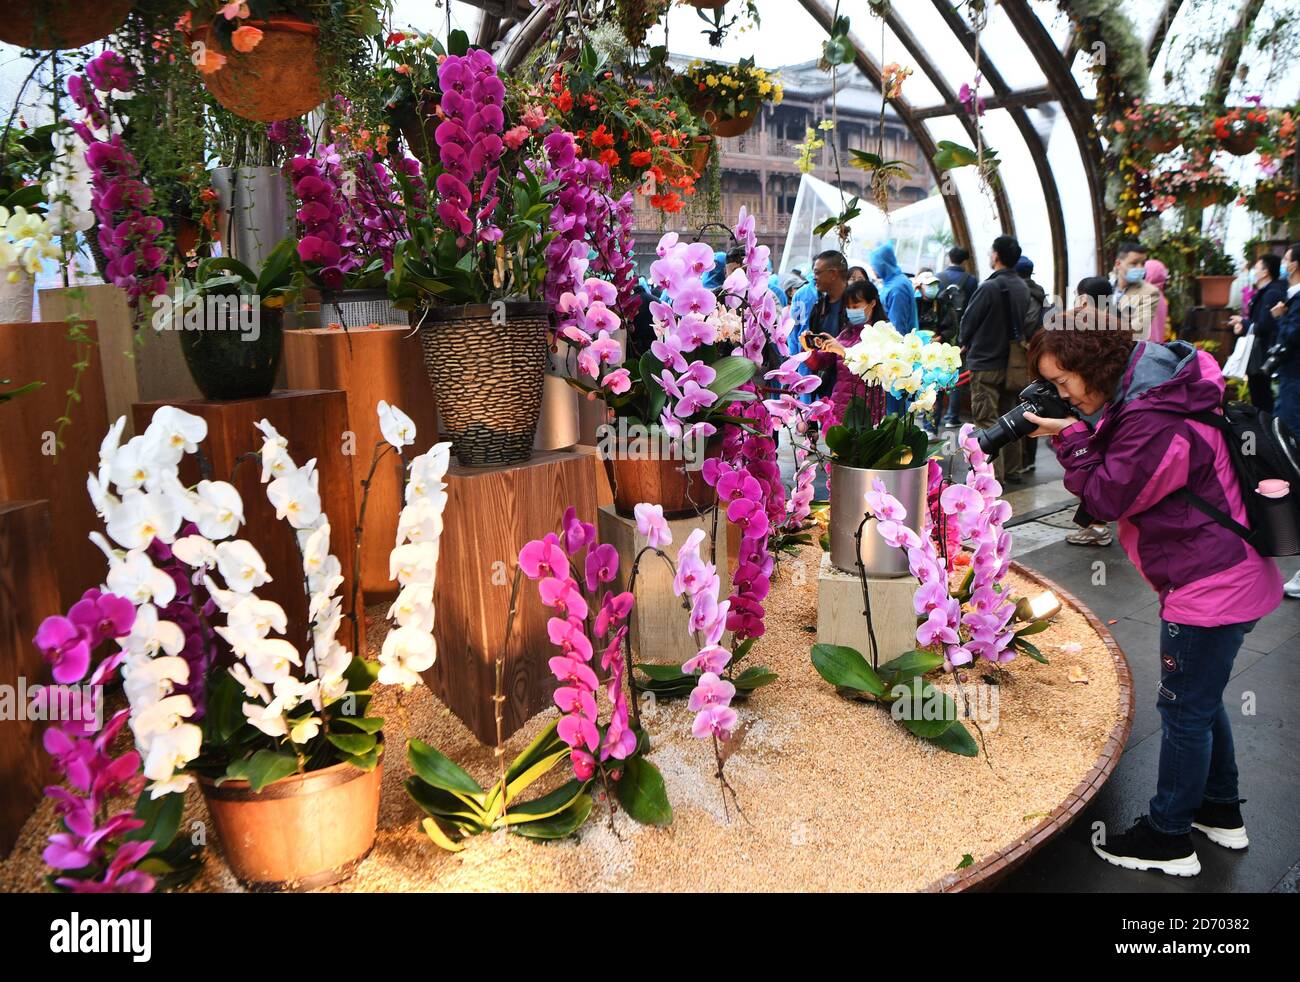 Chongqing, Oct. 20. 29th Oct, 2020. People visit a floral art expo in Chongqing, southwest China, Oct. 20, 2020. The expo kicked off on Tuesday in Chongqing and will last till Oct. 29, 2020. Credit: Wang Quanchao/Xinhua/Alamy Live News Stock Photo